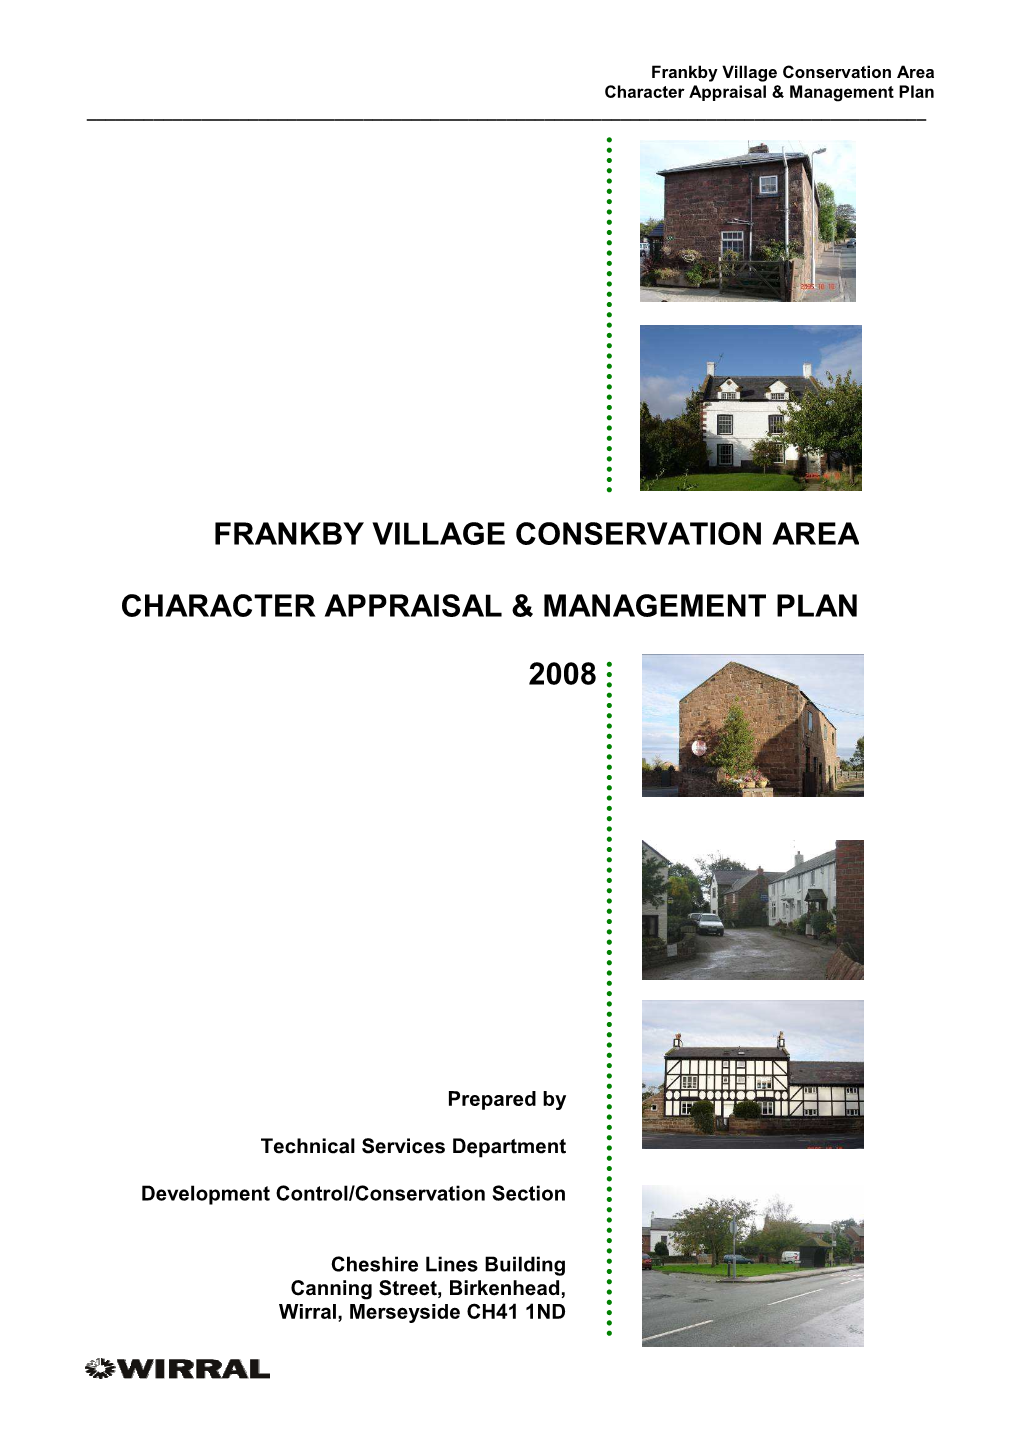 Frankby Village Character Appraisal and Management